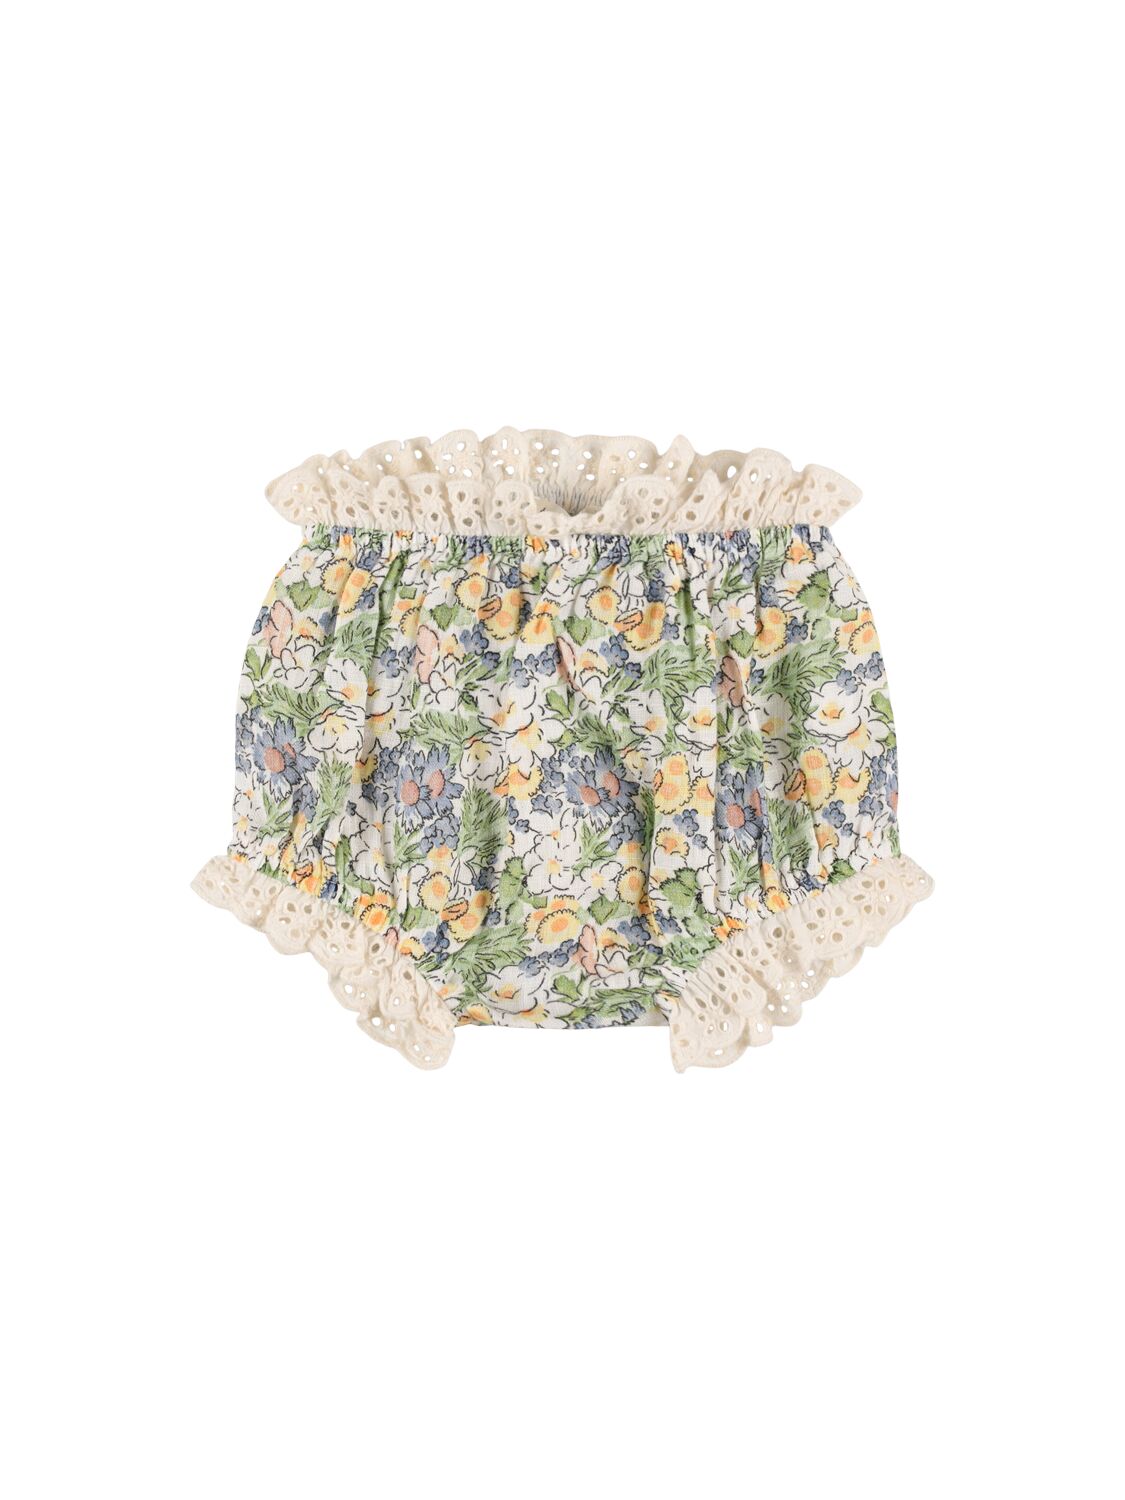 Image of Printed Linen Diaper Cover W/lace